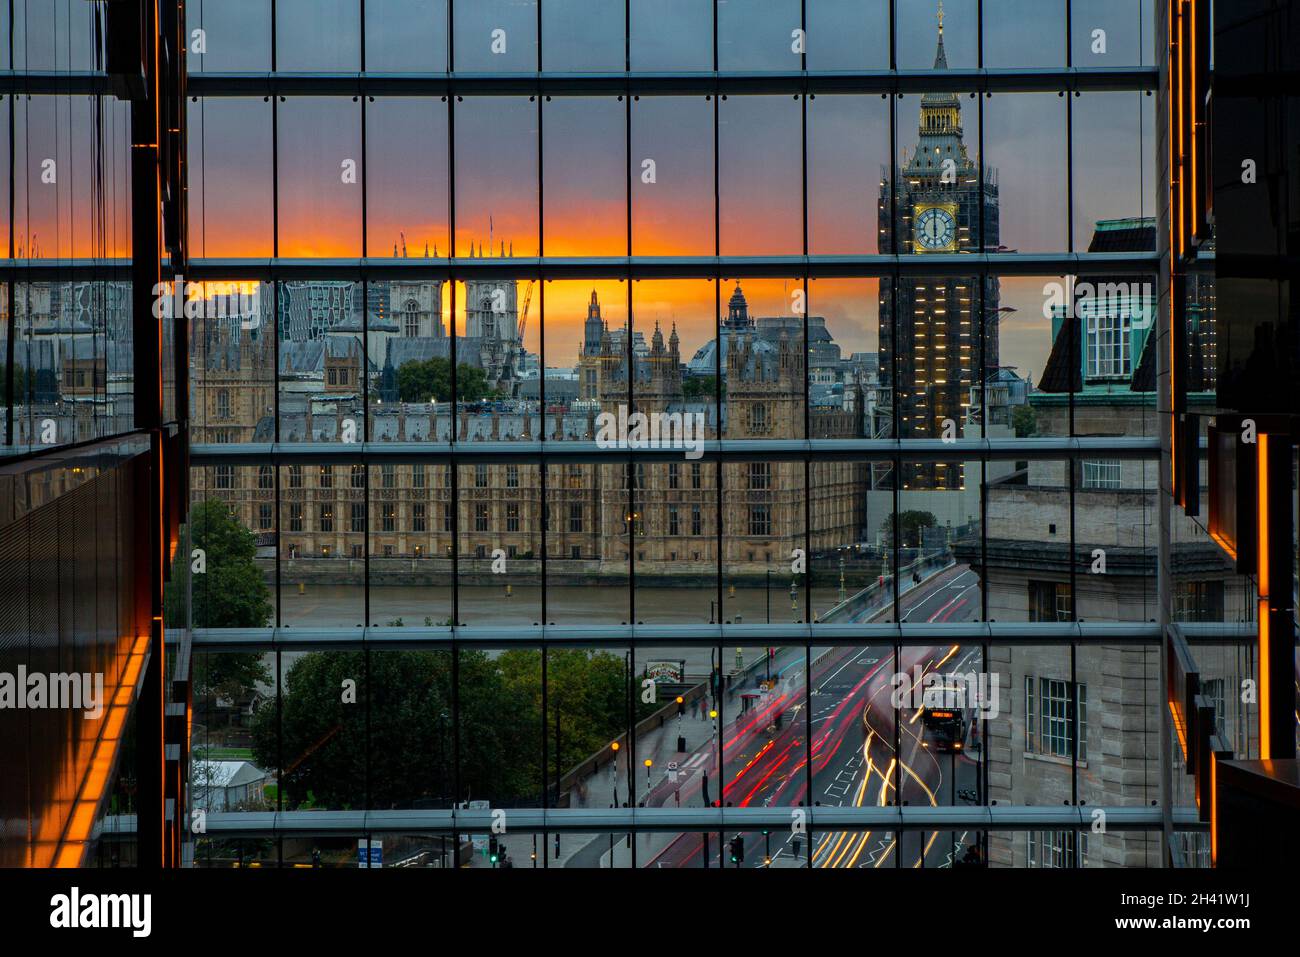 A reflection of Big Ben, the Houses of Paliament and traffic going over Westminster Bridge from an unusual angle Stock Photo